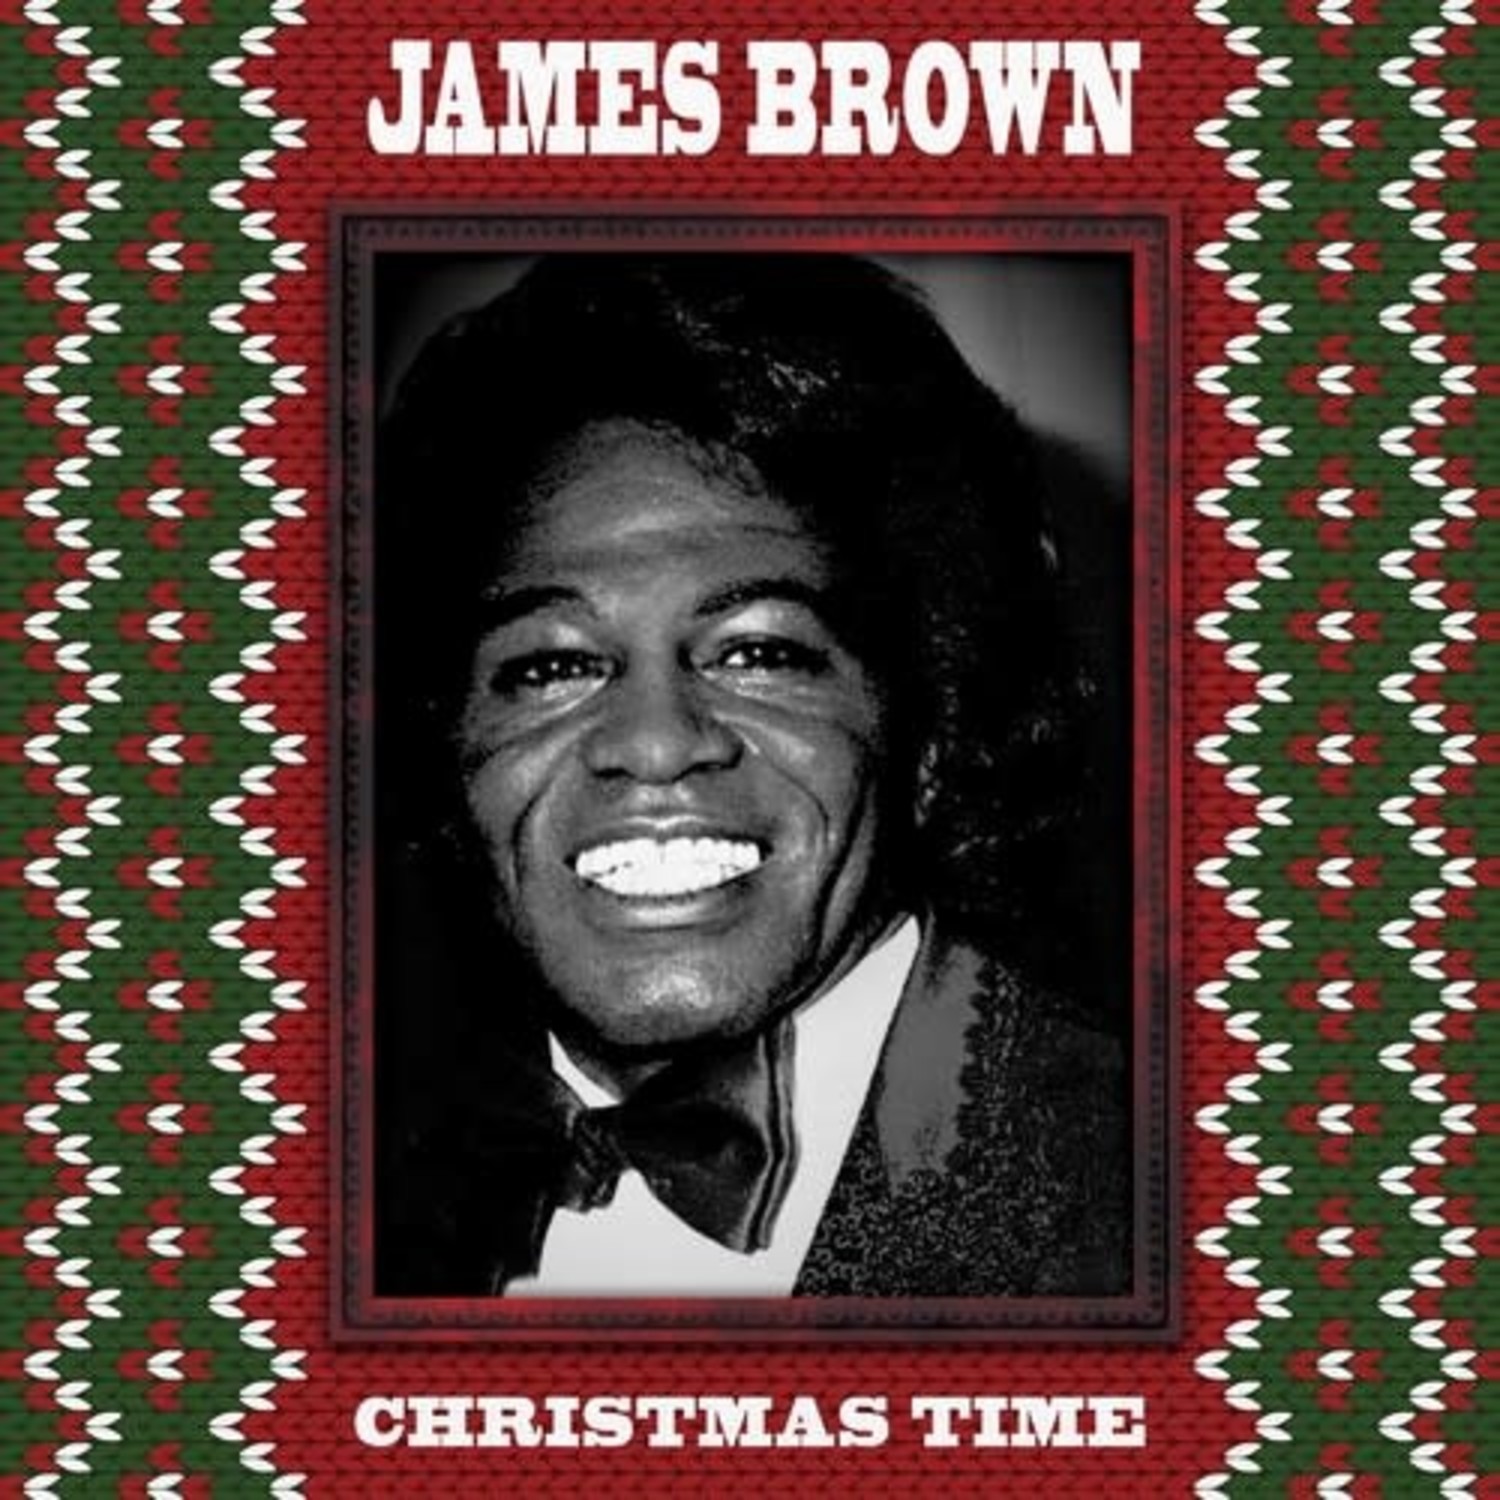 Brown, James - Christmas Time LP (red vinyl) - Wax Trax Records